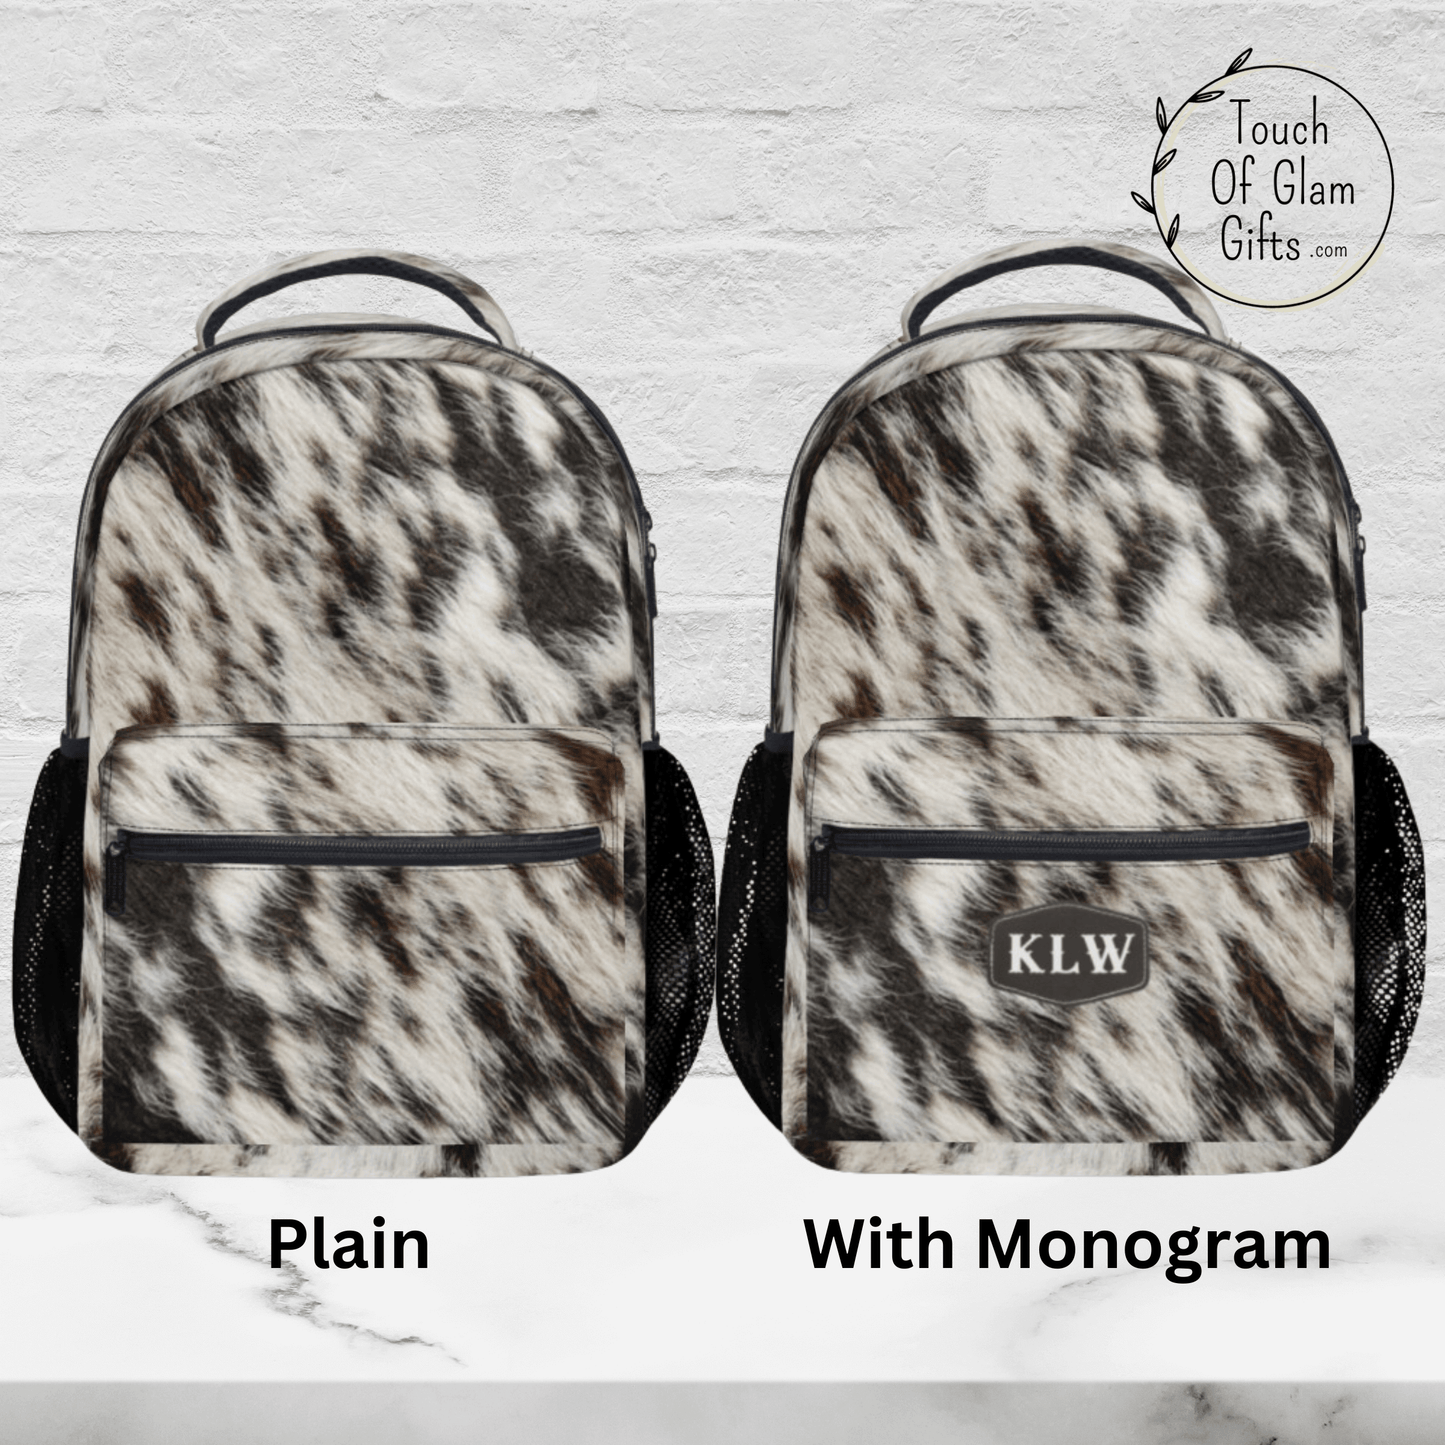 You choose if you want our cowhide backpack plain or monogrammed.